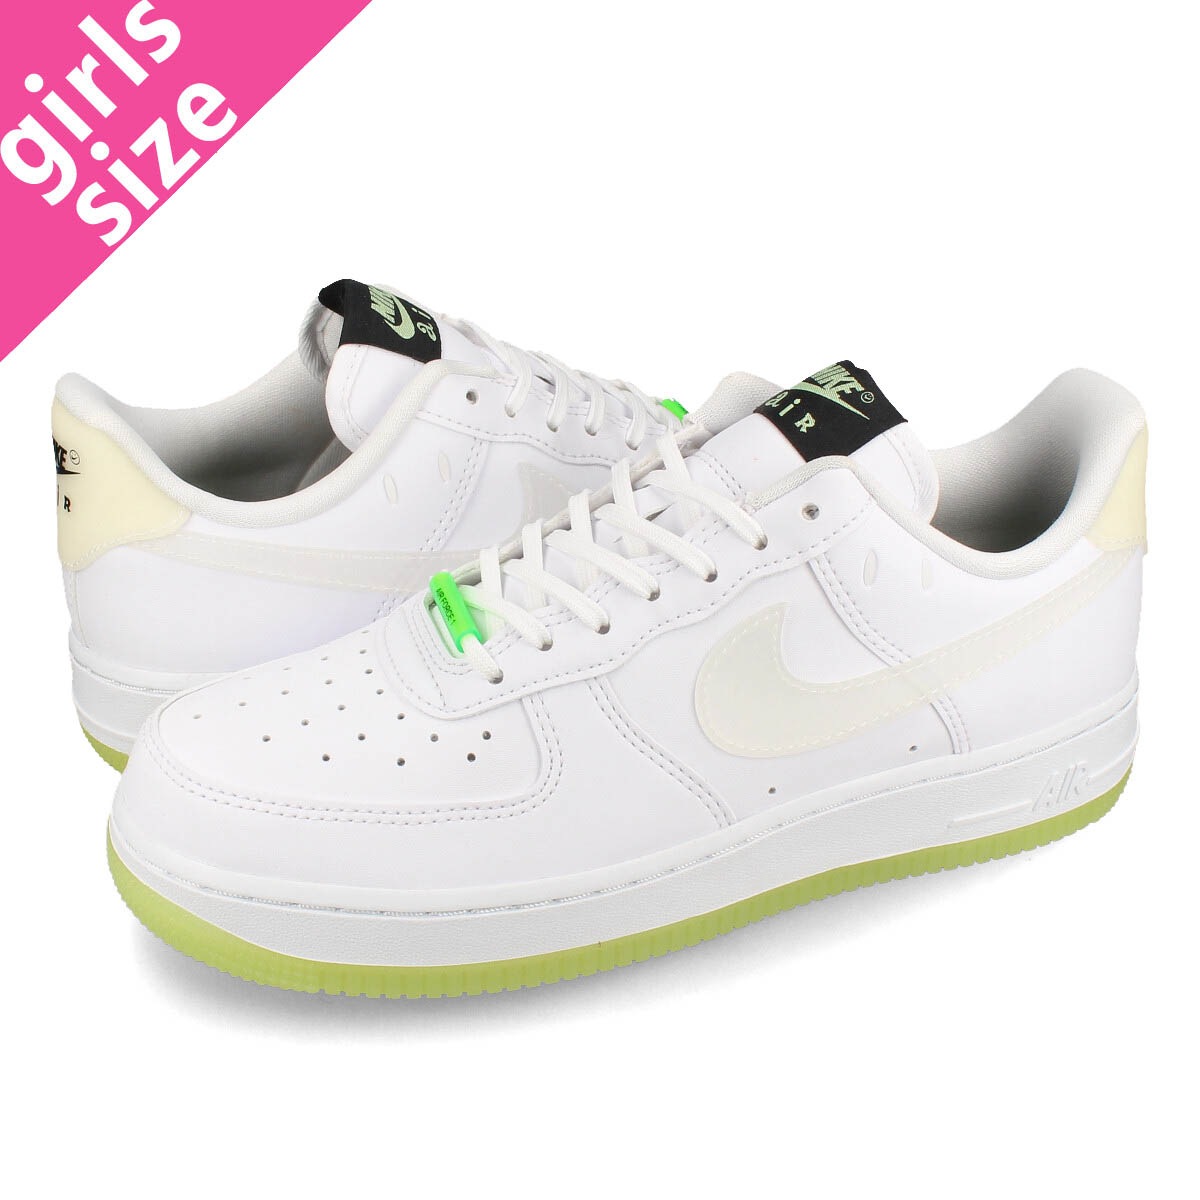 NIKE WMNS AIR FORCE 1 07 LX 【GLOW IN THE DARK】 WHITE/BARELY VOLT/BLACK